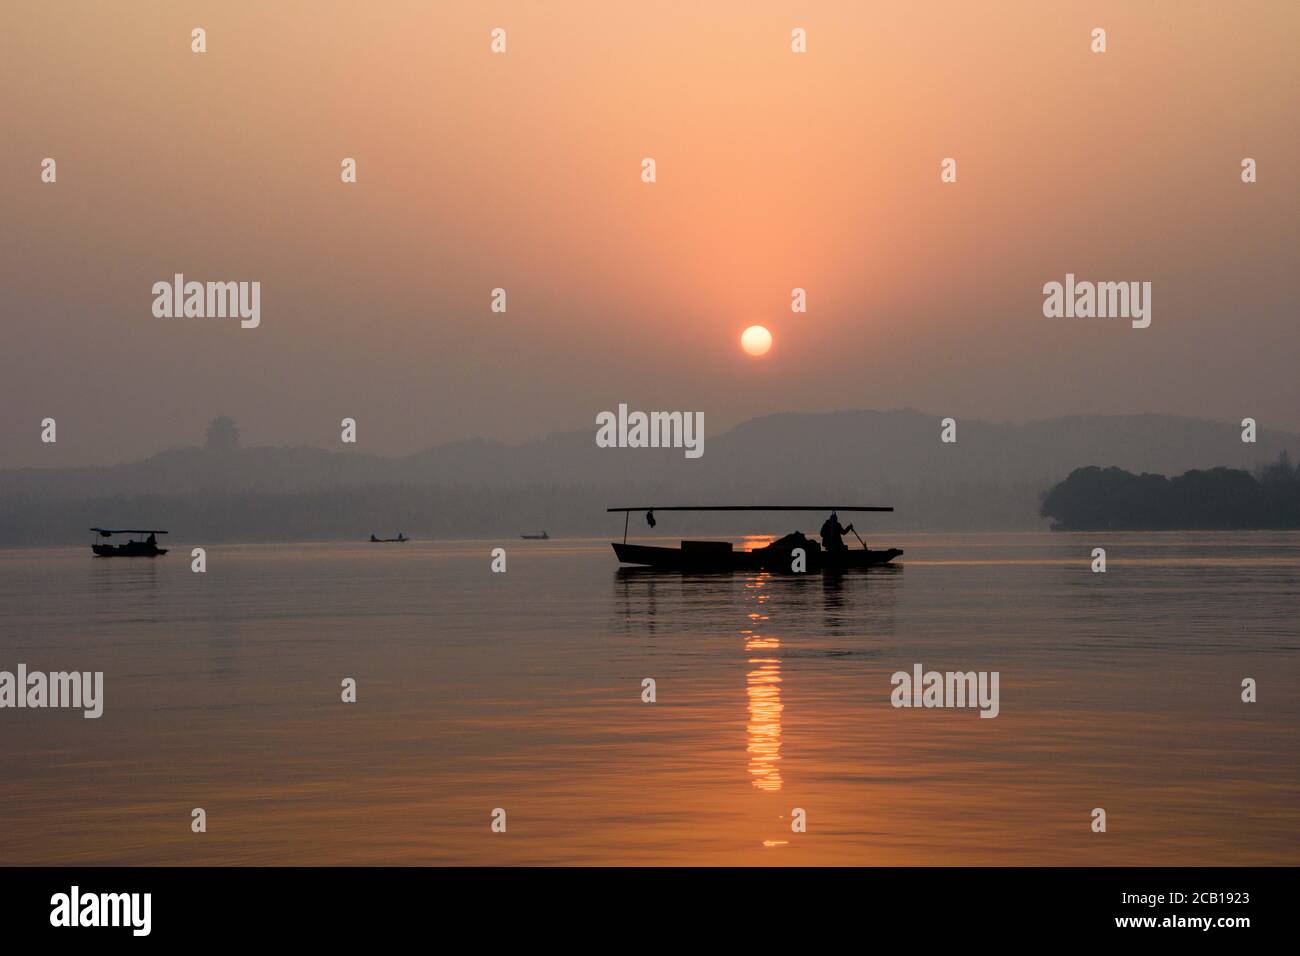 Boats floating on water lake in Hangzhou, China during sunset Stock Photo